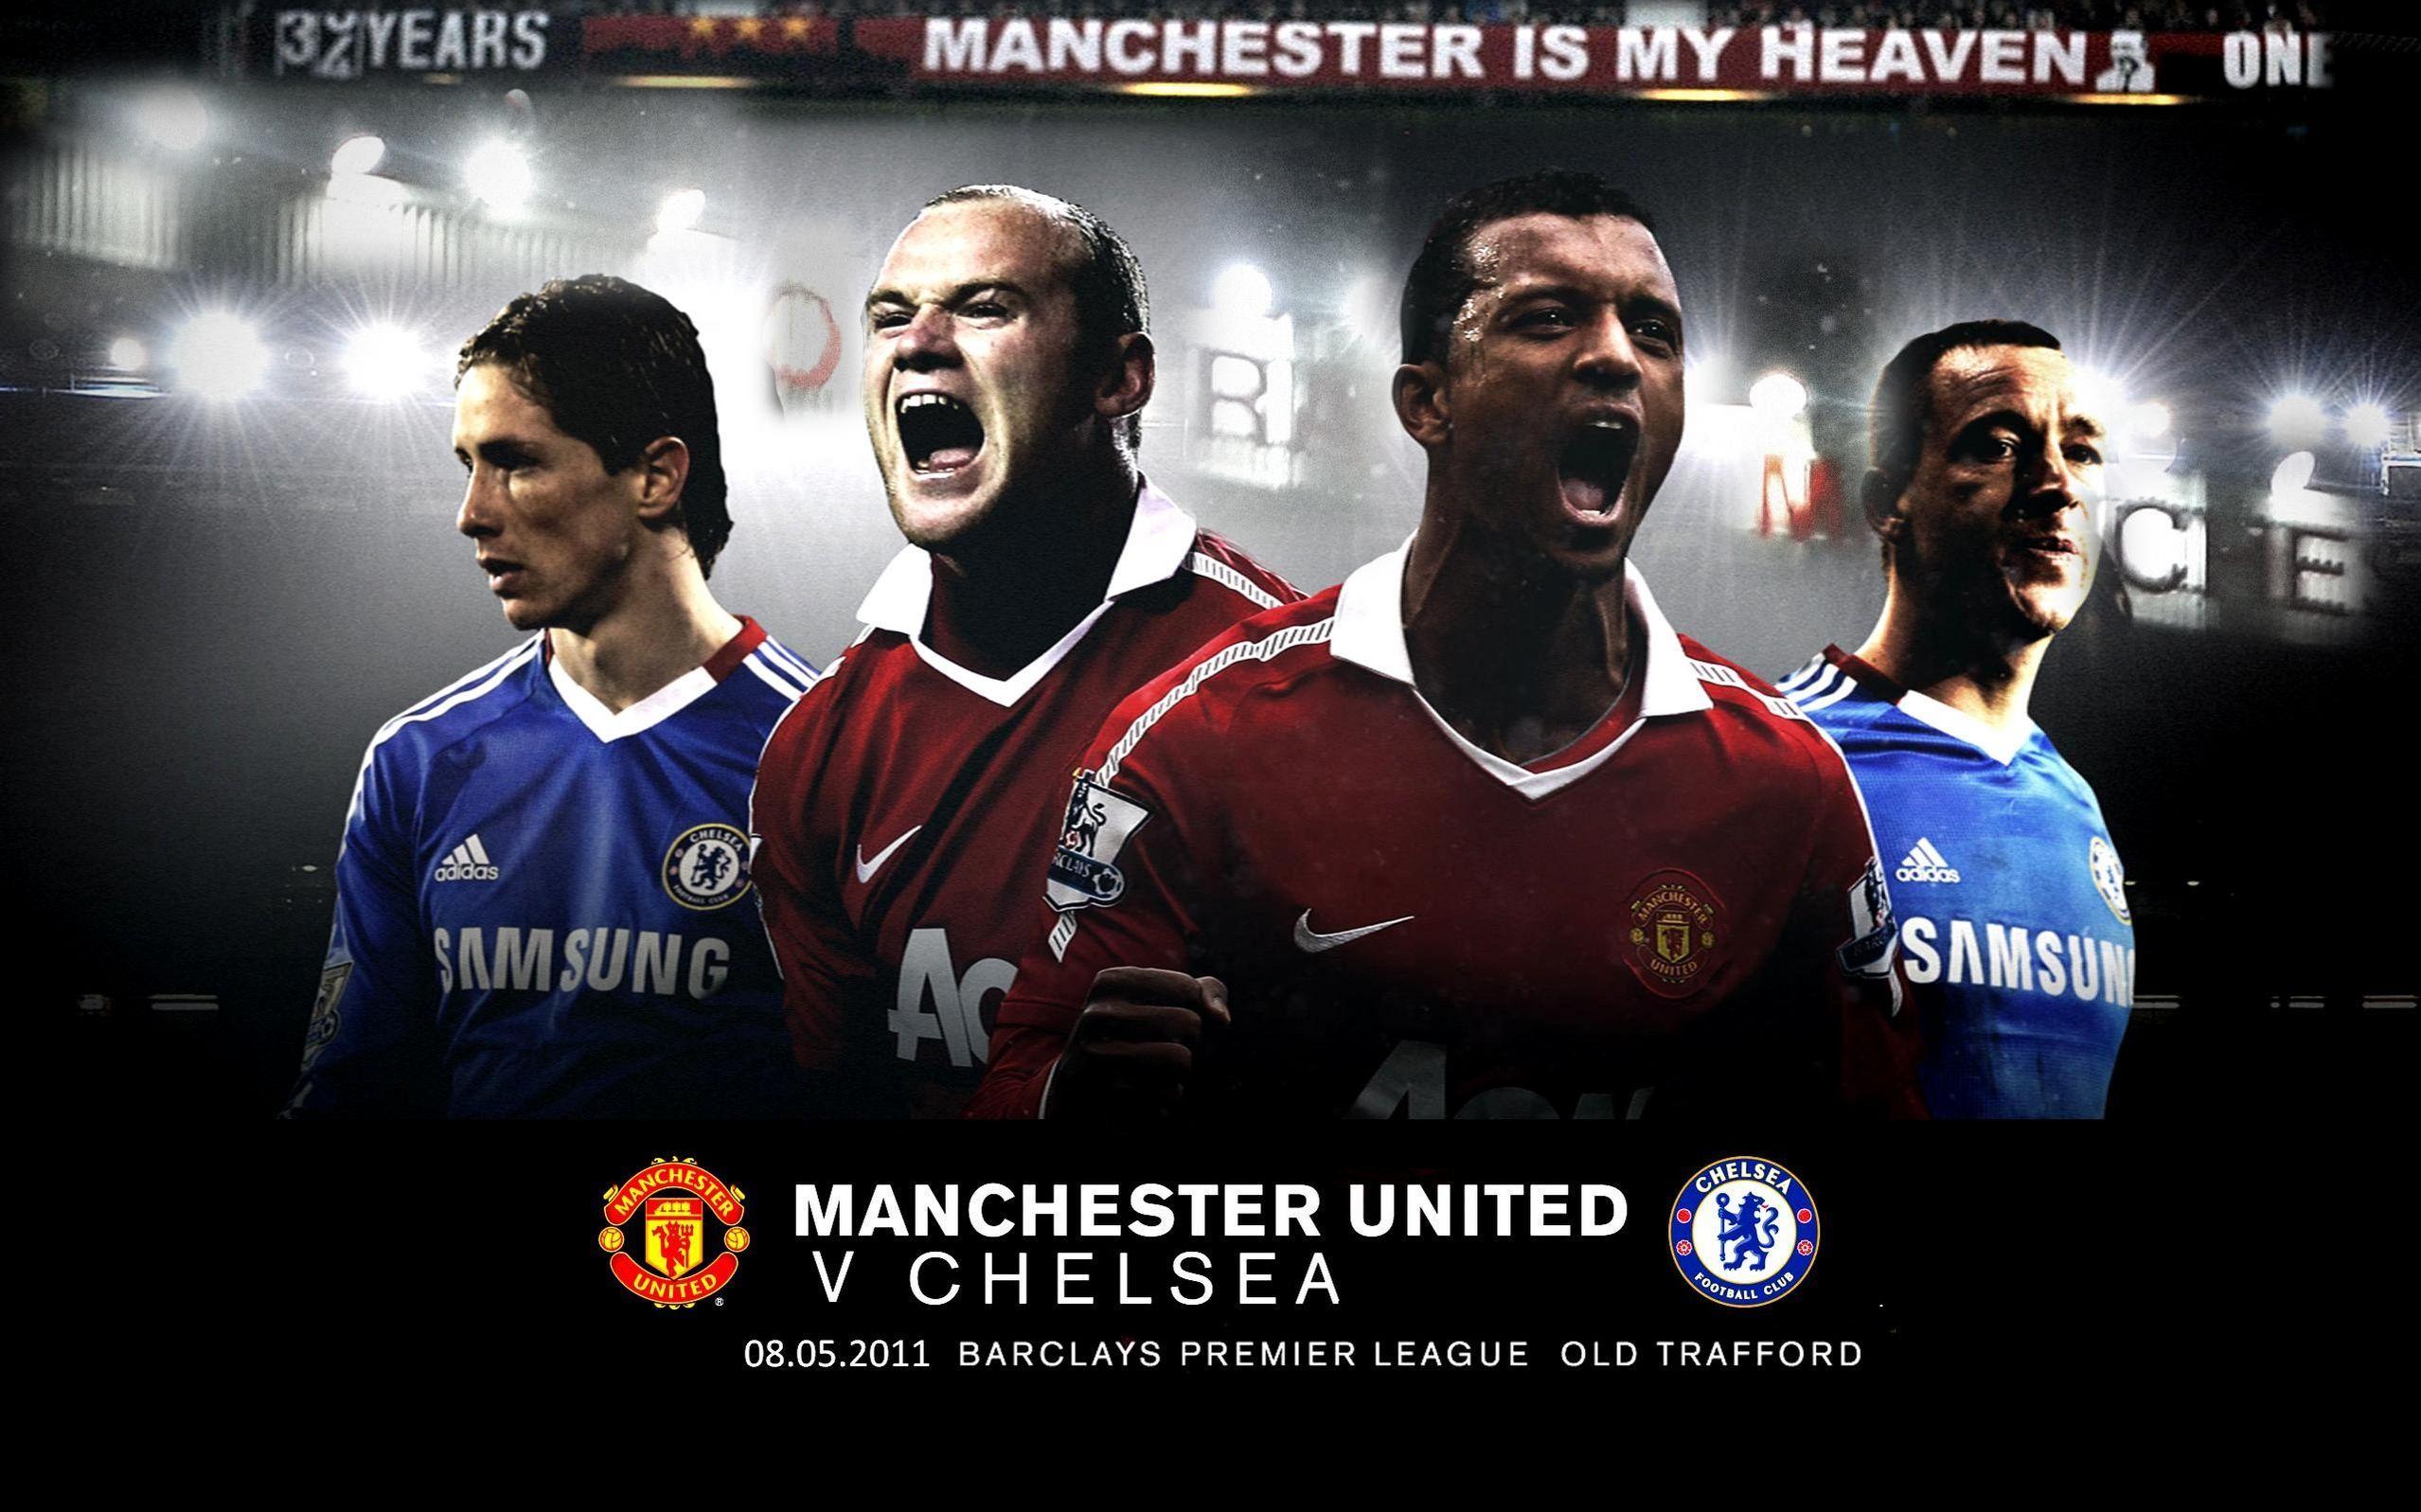 Liverpool Vs Manchester United Image